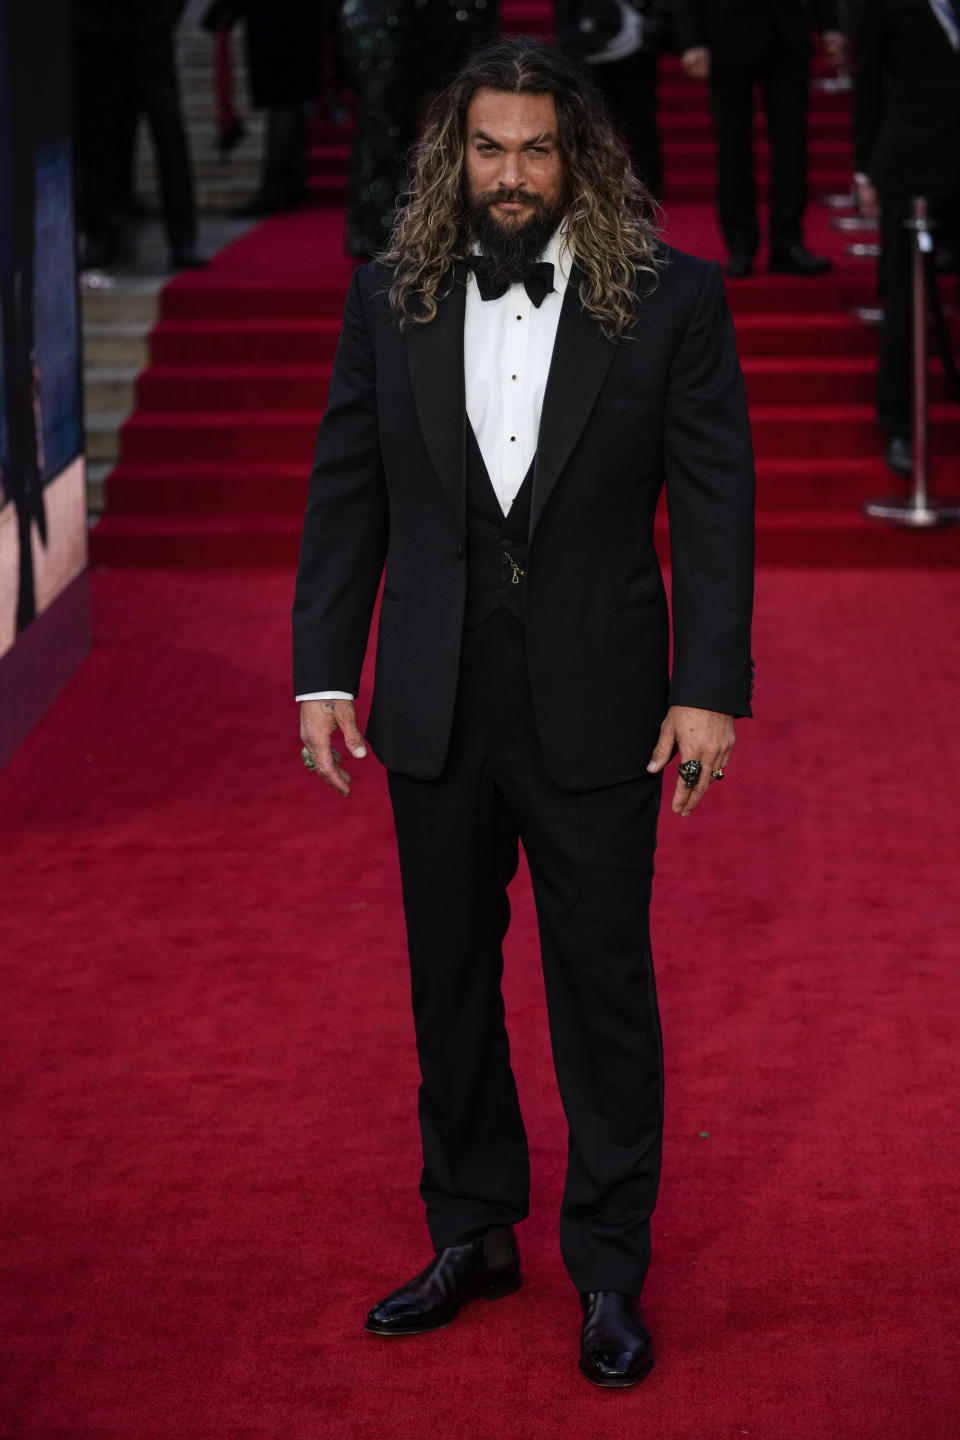 Jason Momoa poses for photographers upon arrival for the world premiere of the new film from the James Bond franchise "No Time To Die" in London, Tuesday, Sept. 28, 2021. (AP Photo/Matt Dunham)